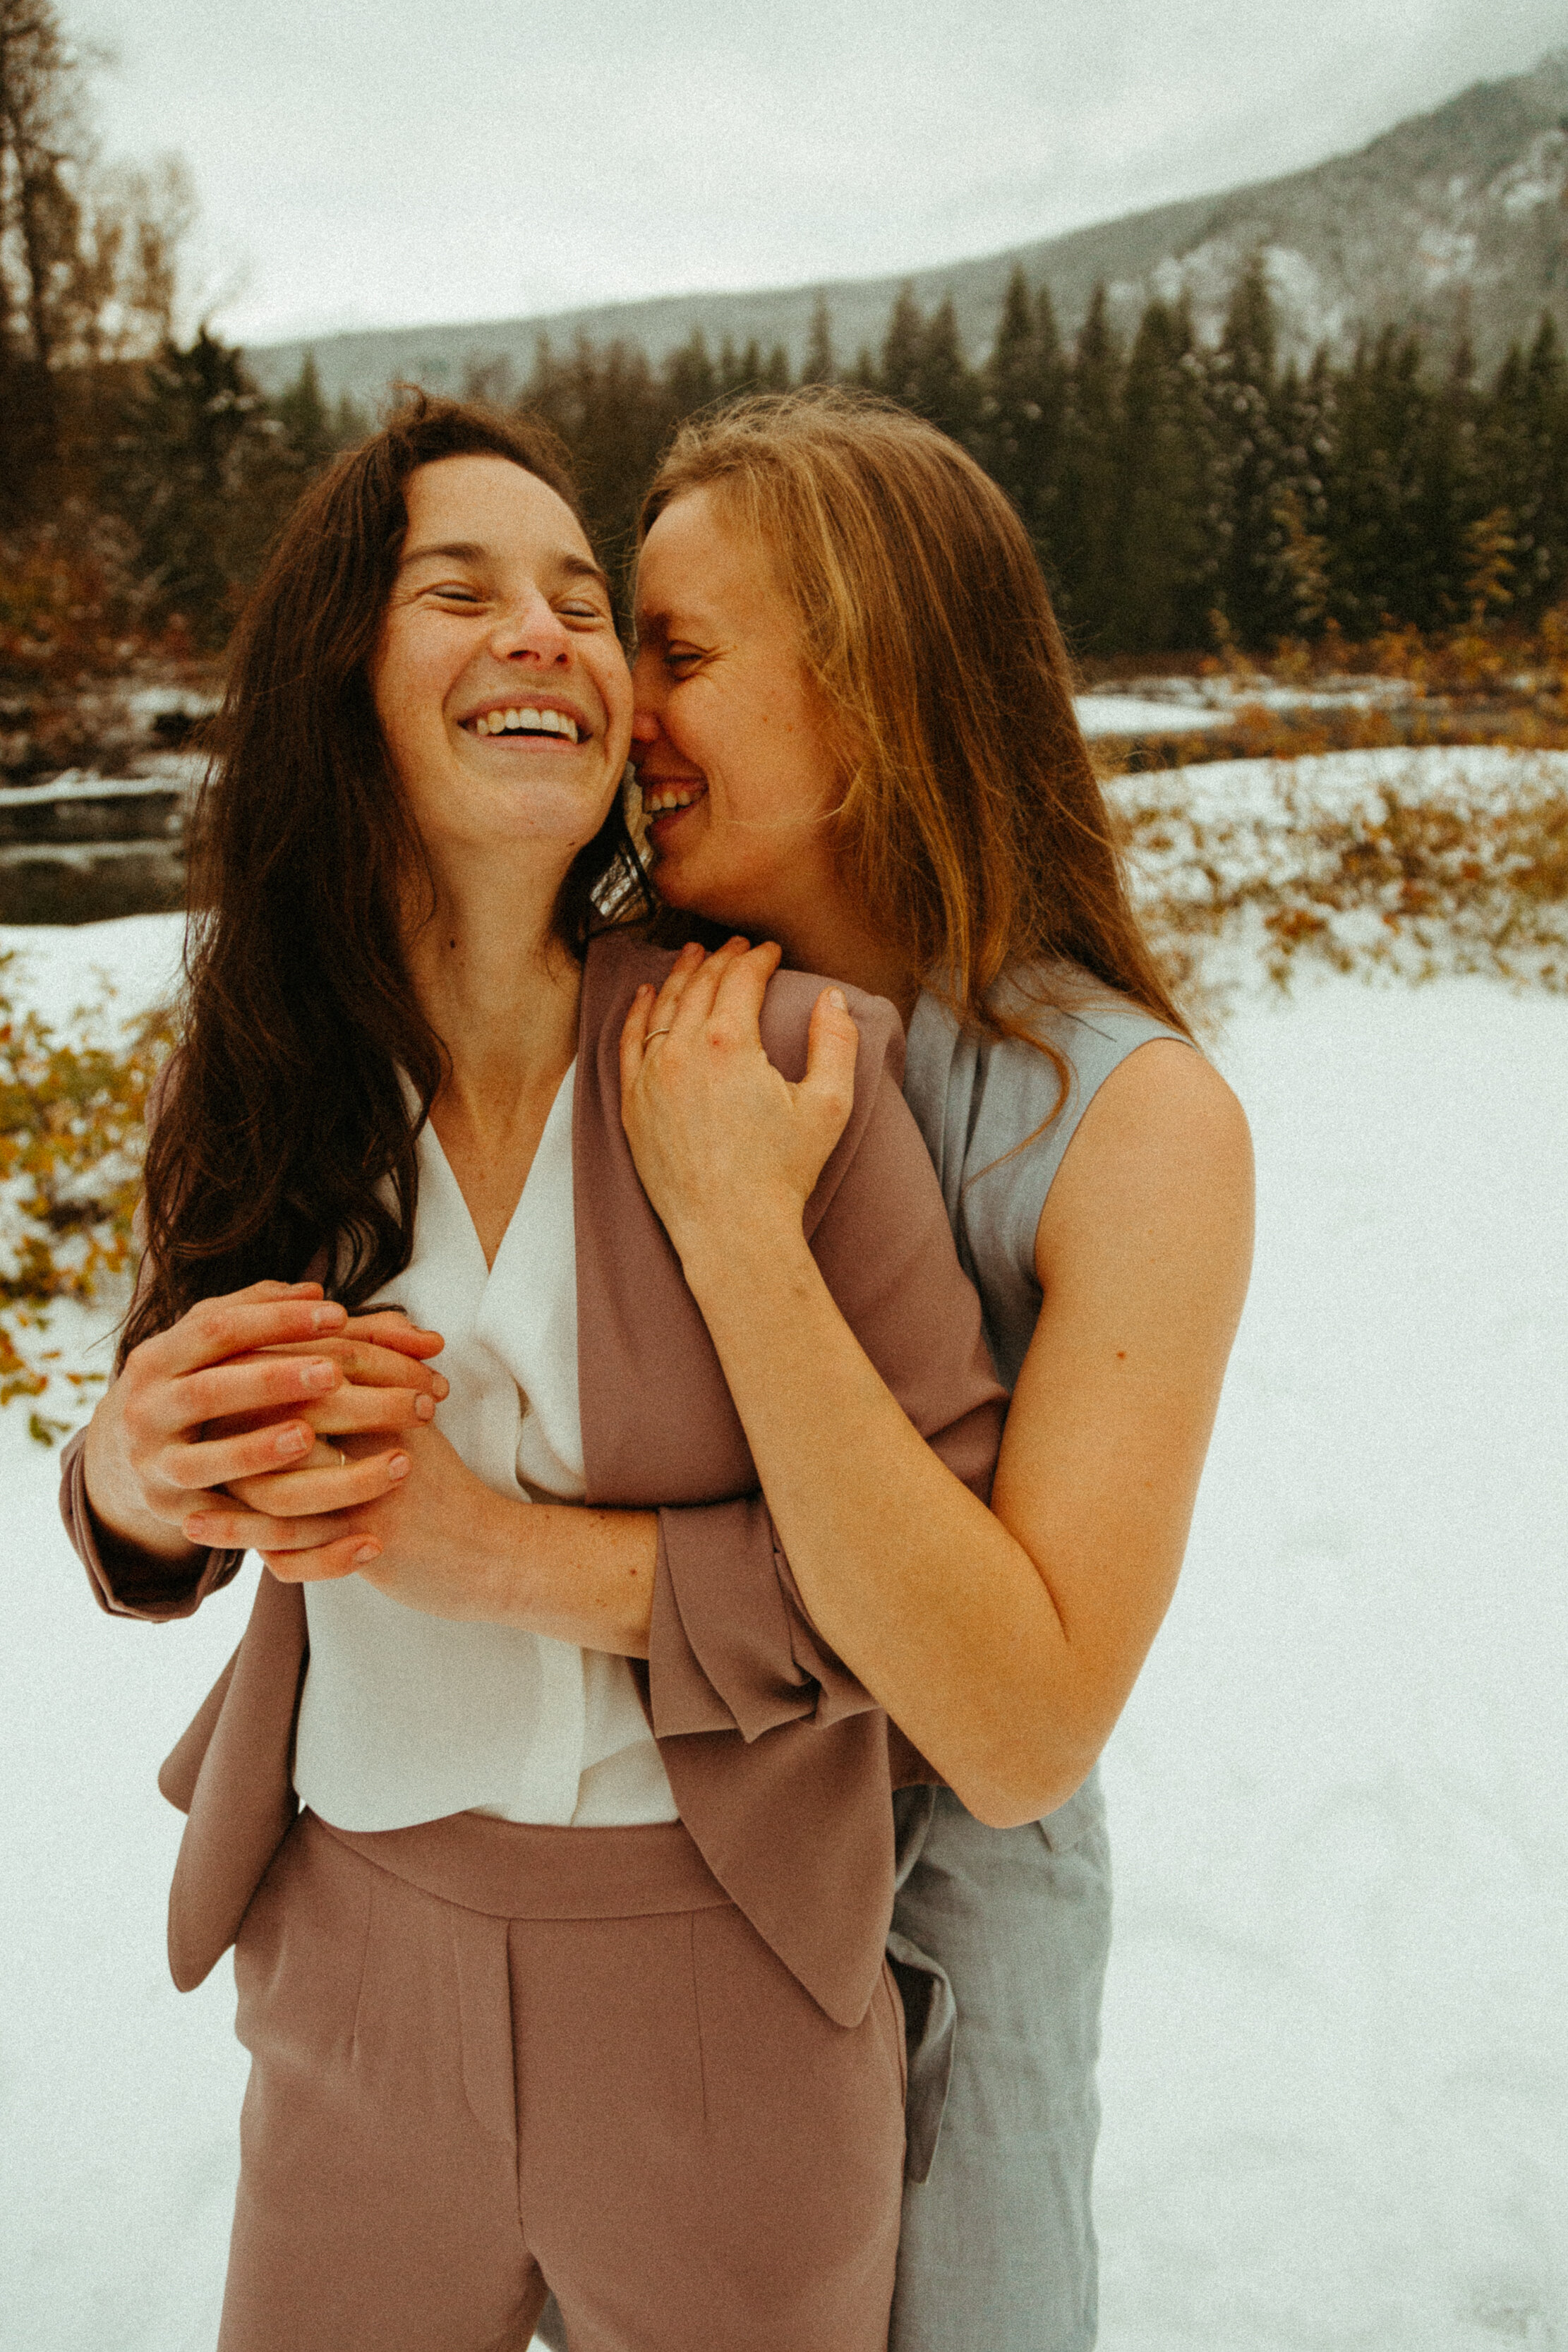 queer-gay-lesbian-trans-affirming-lgbtq-adventure-elopement-intimate-wedding-photographer-pnw-pacific-northwest-pnw-mountain-stream-forest-cowgay-tacoma-seattle-washington-portland-oregon-halle-roland-photography-non-binary-analog-film-artist-165-201.jpg